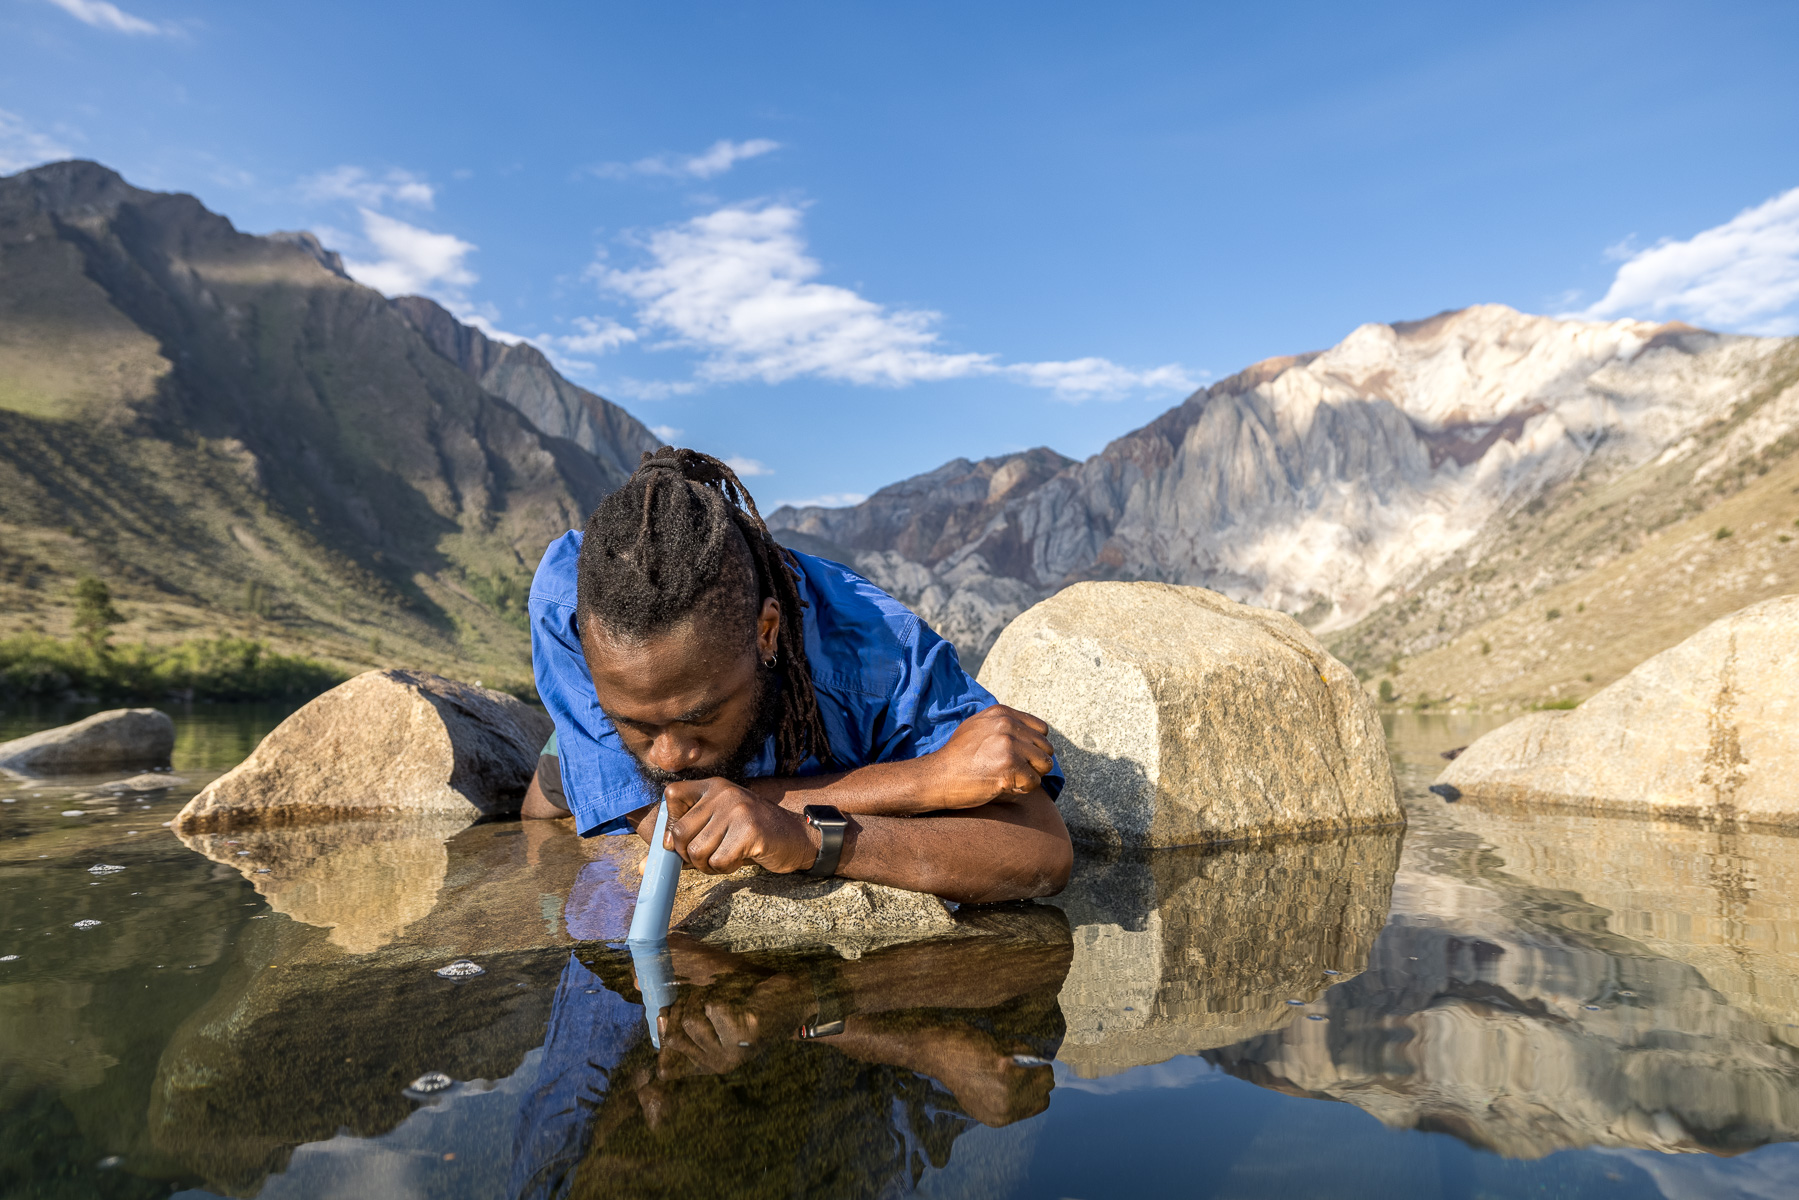 Testing the LifeStraw water filter